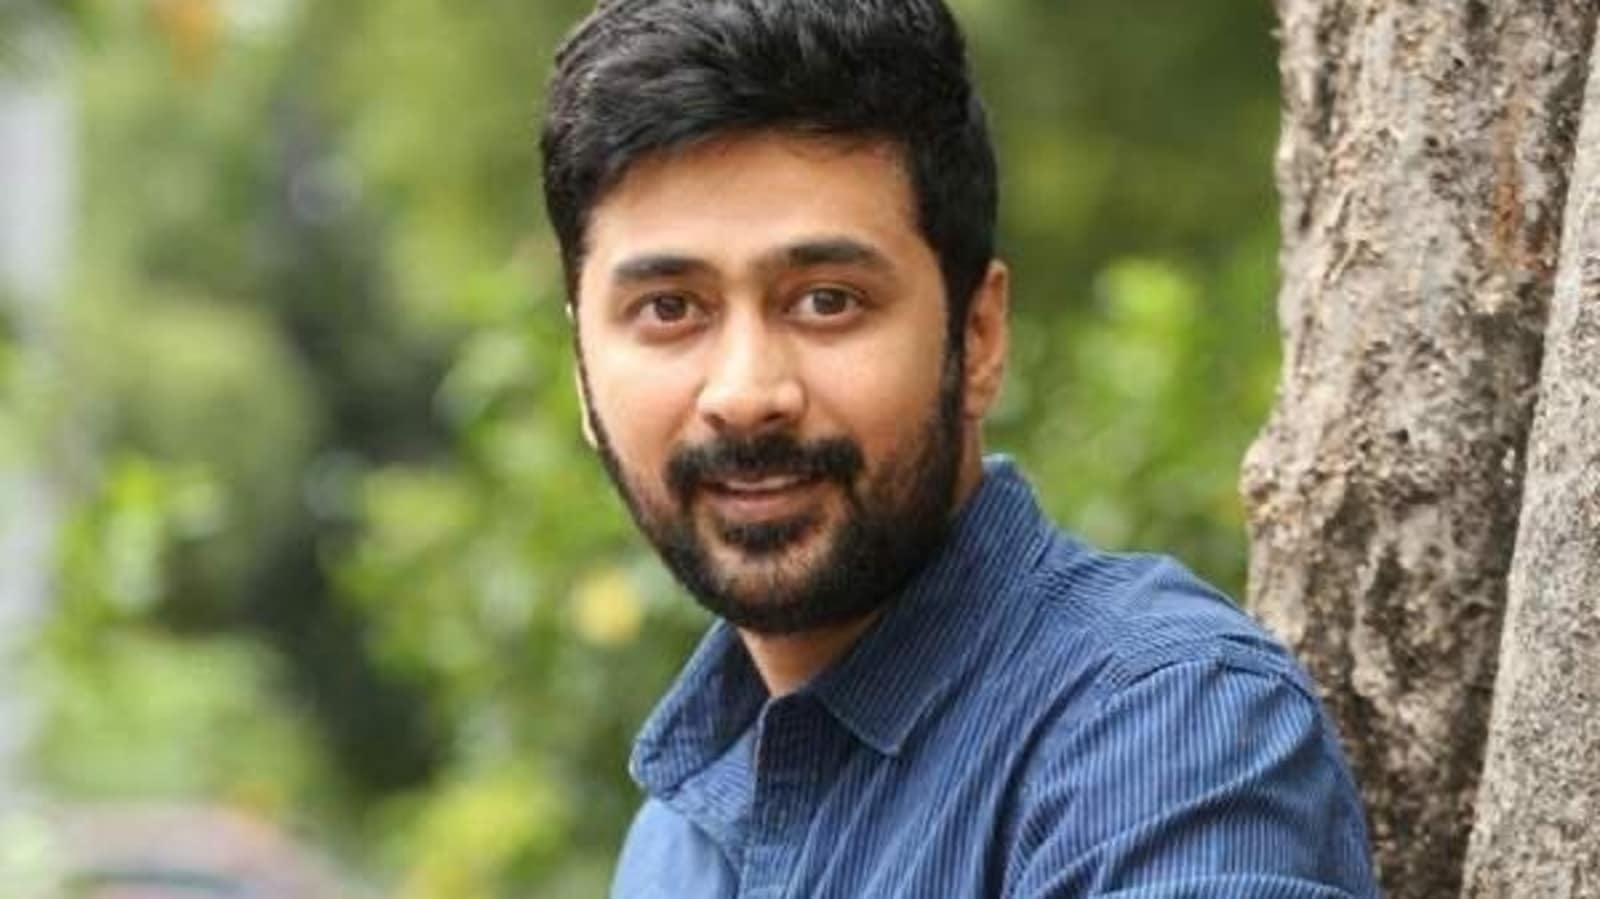 Rahul Ravindran says he is open to working with transgender assistant director, earns 'respect' from fans - Hindustan Times